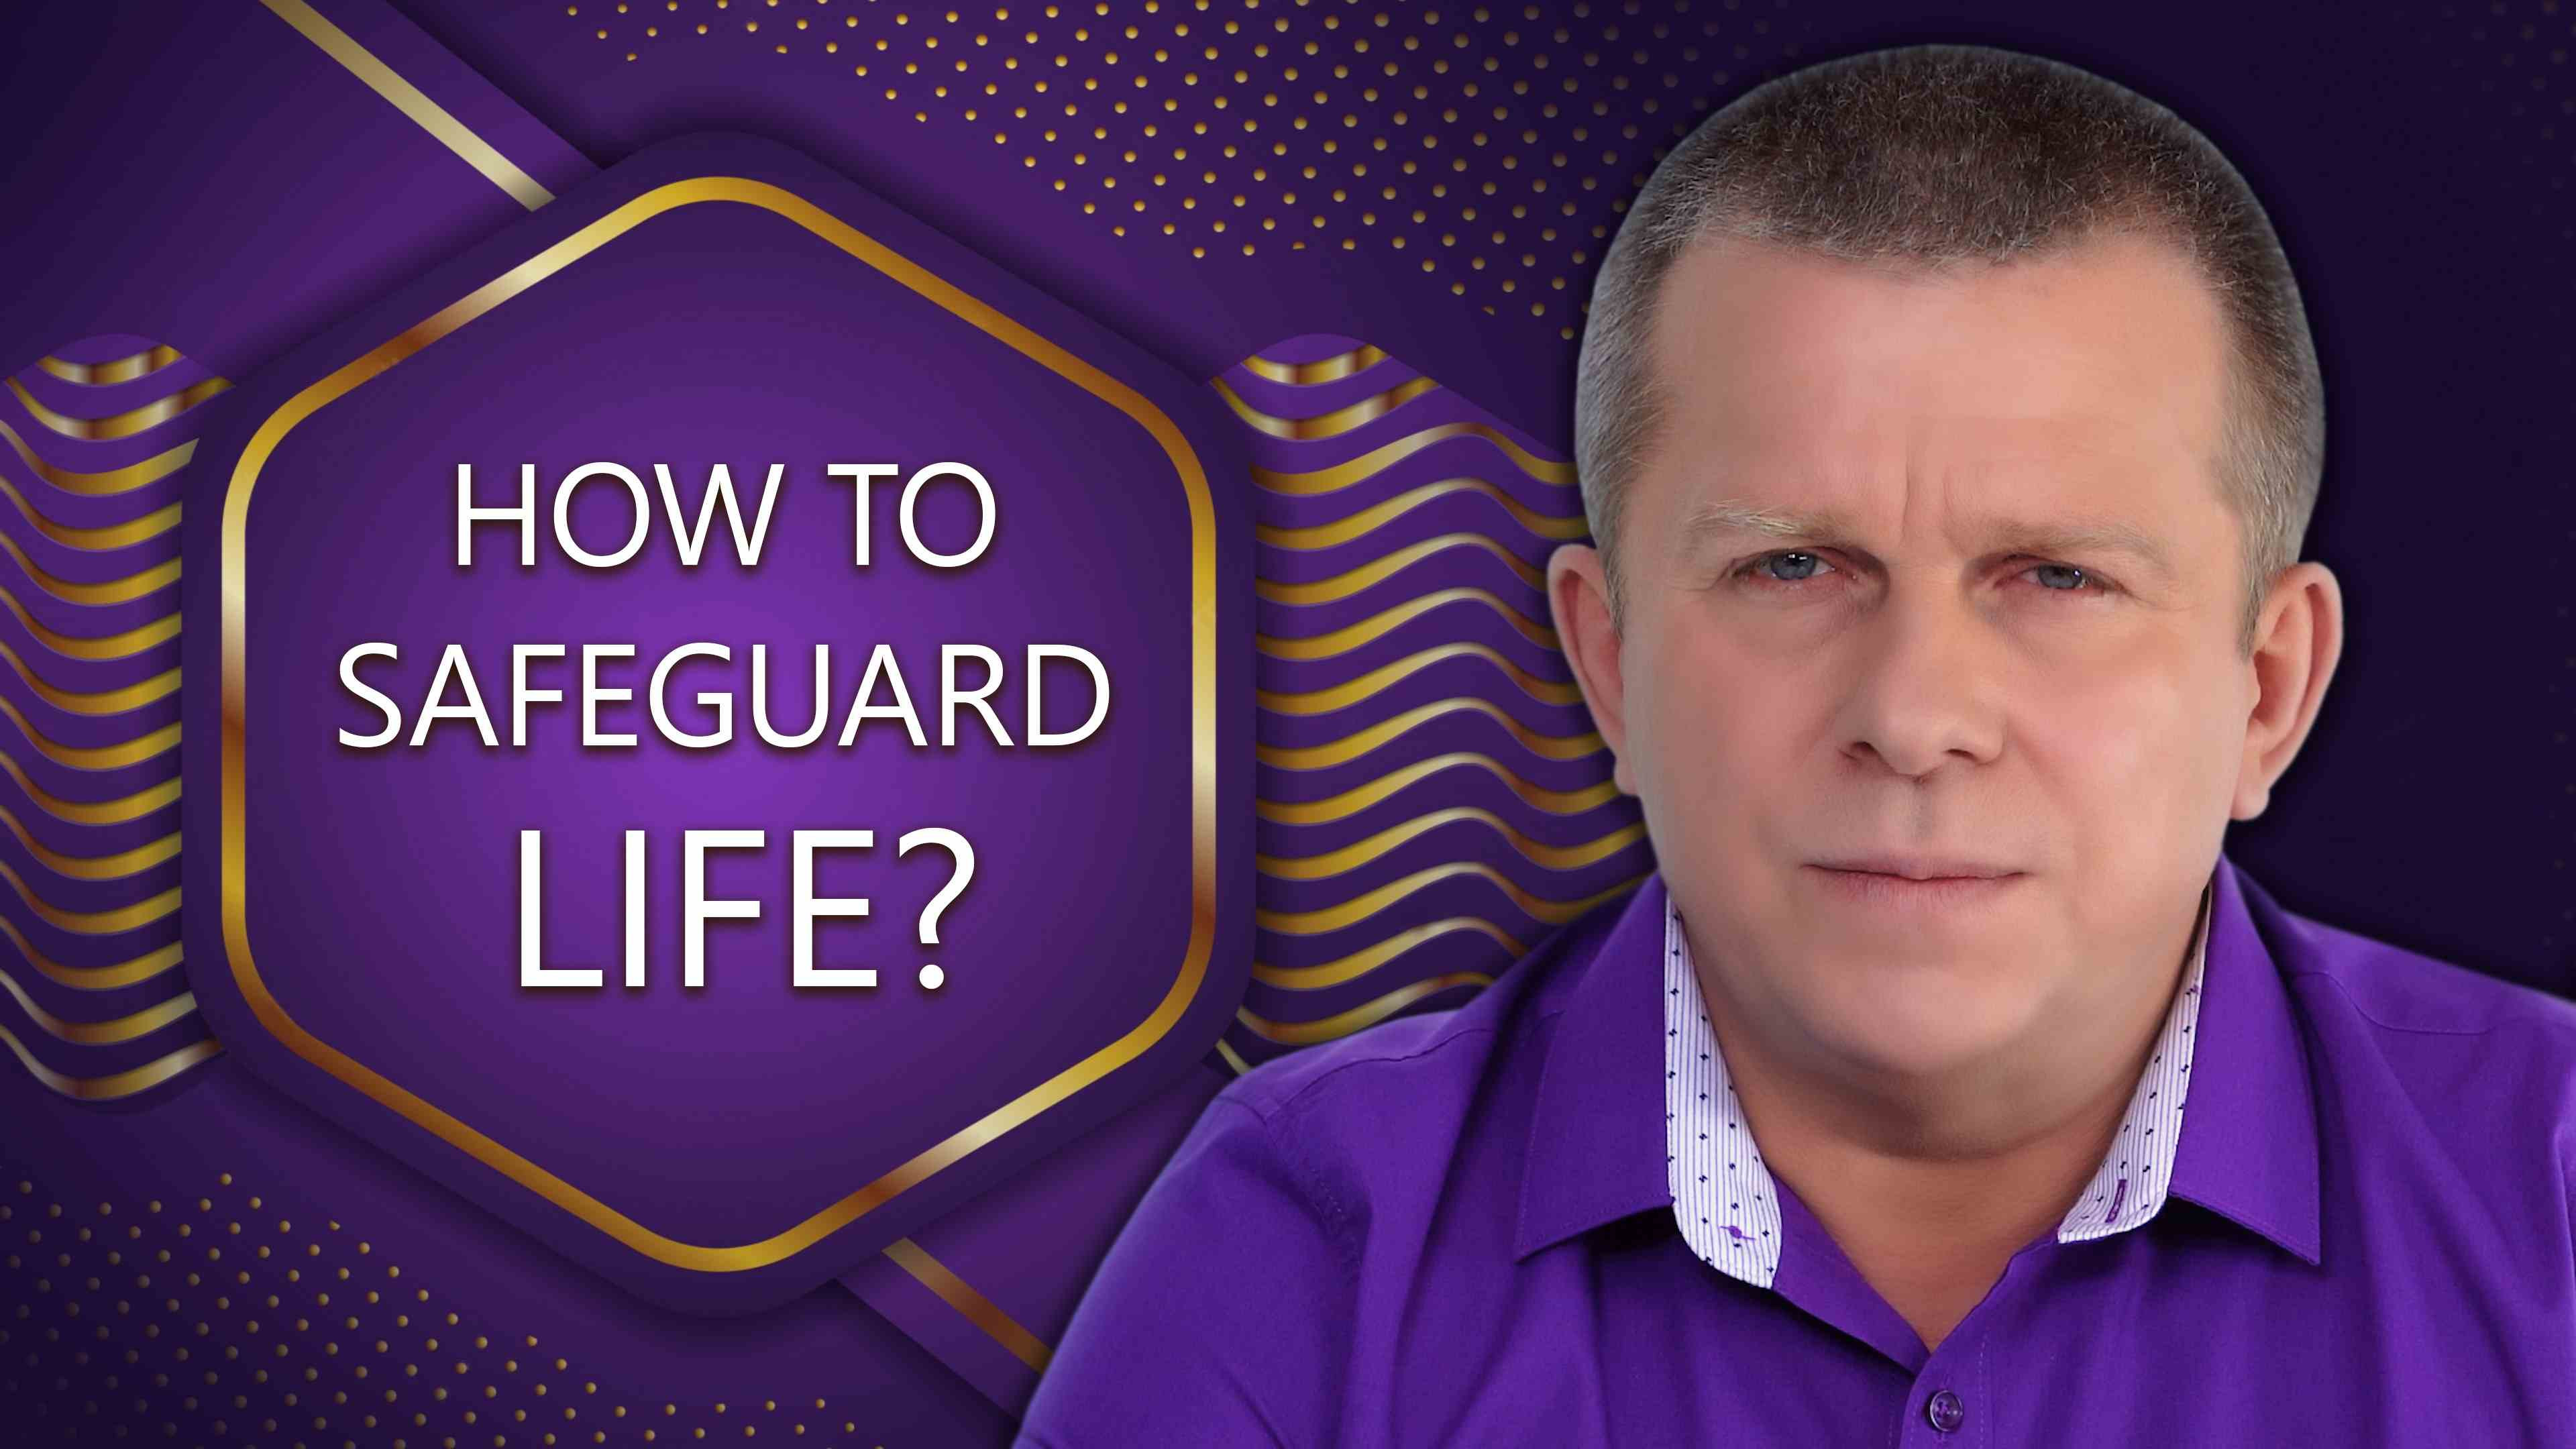 How to Safeguard Life?